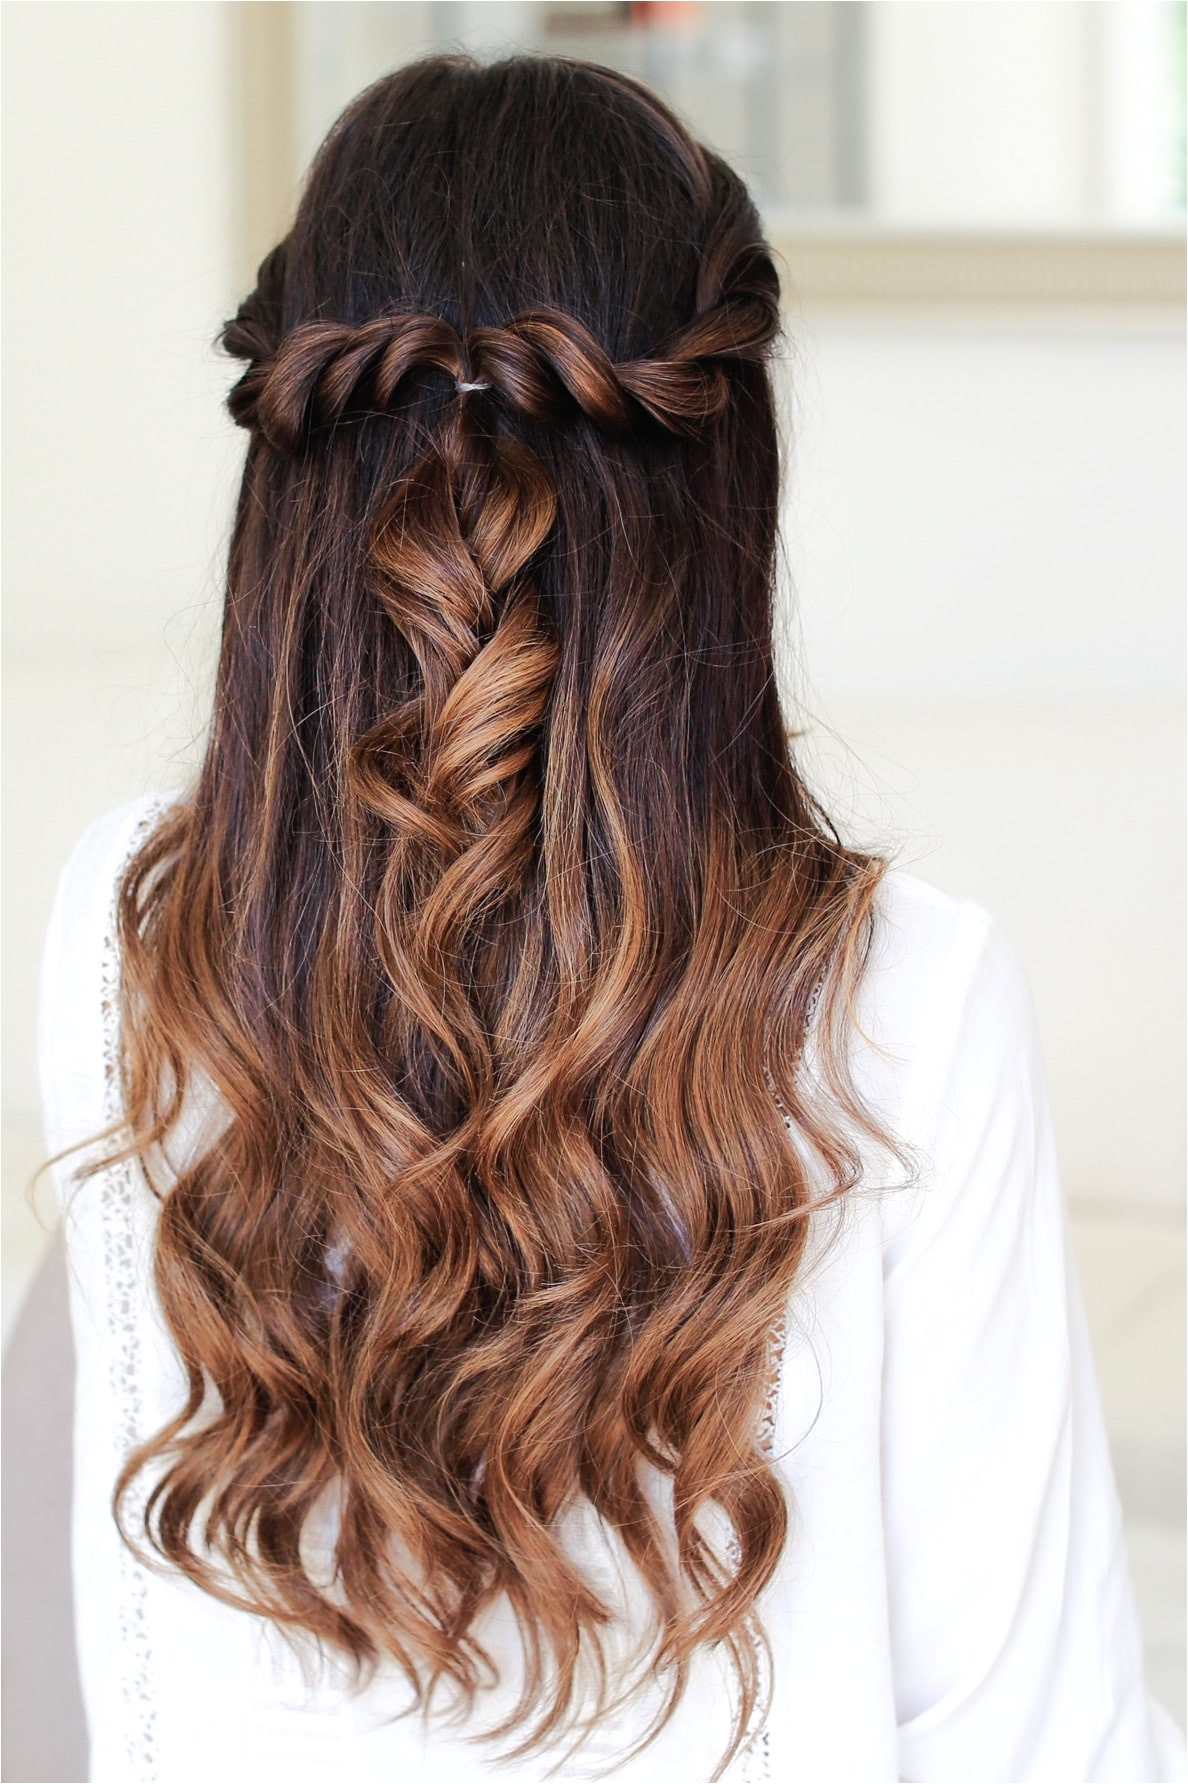 easy and cute braided hairstyles for girls every morning before school